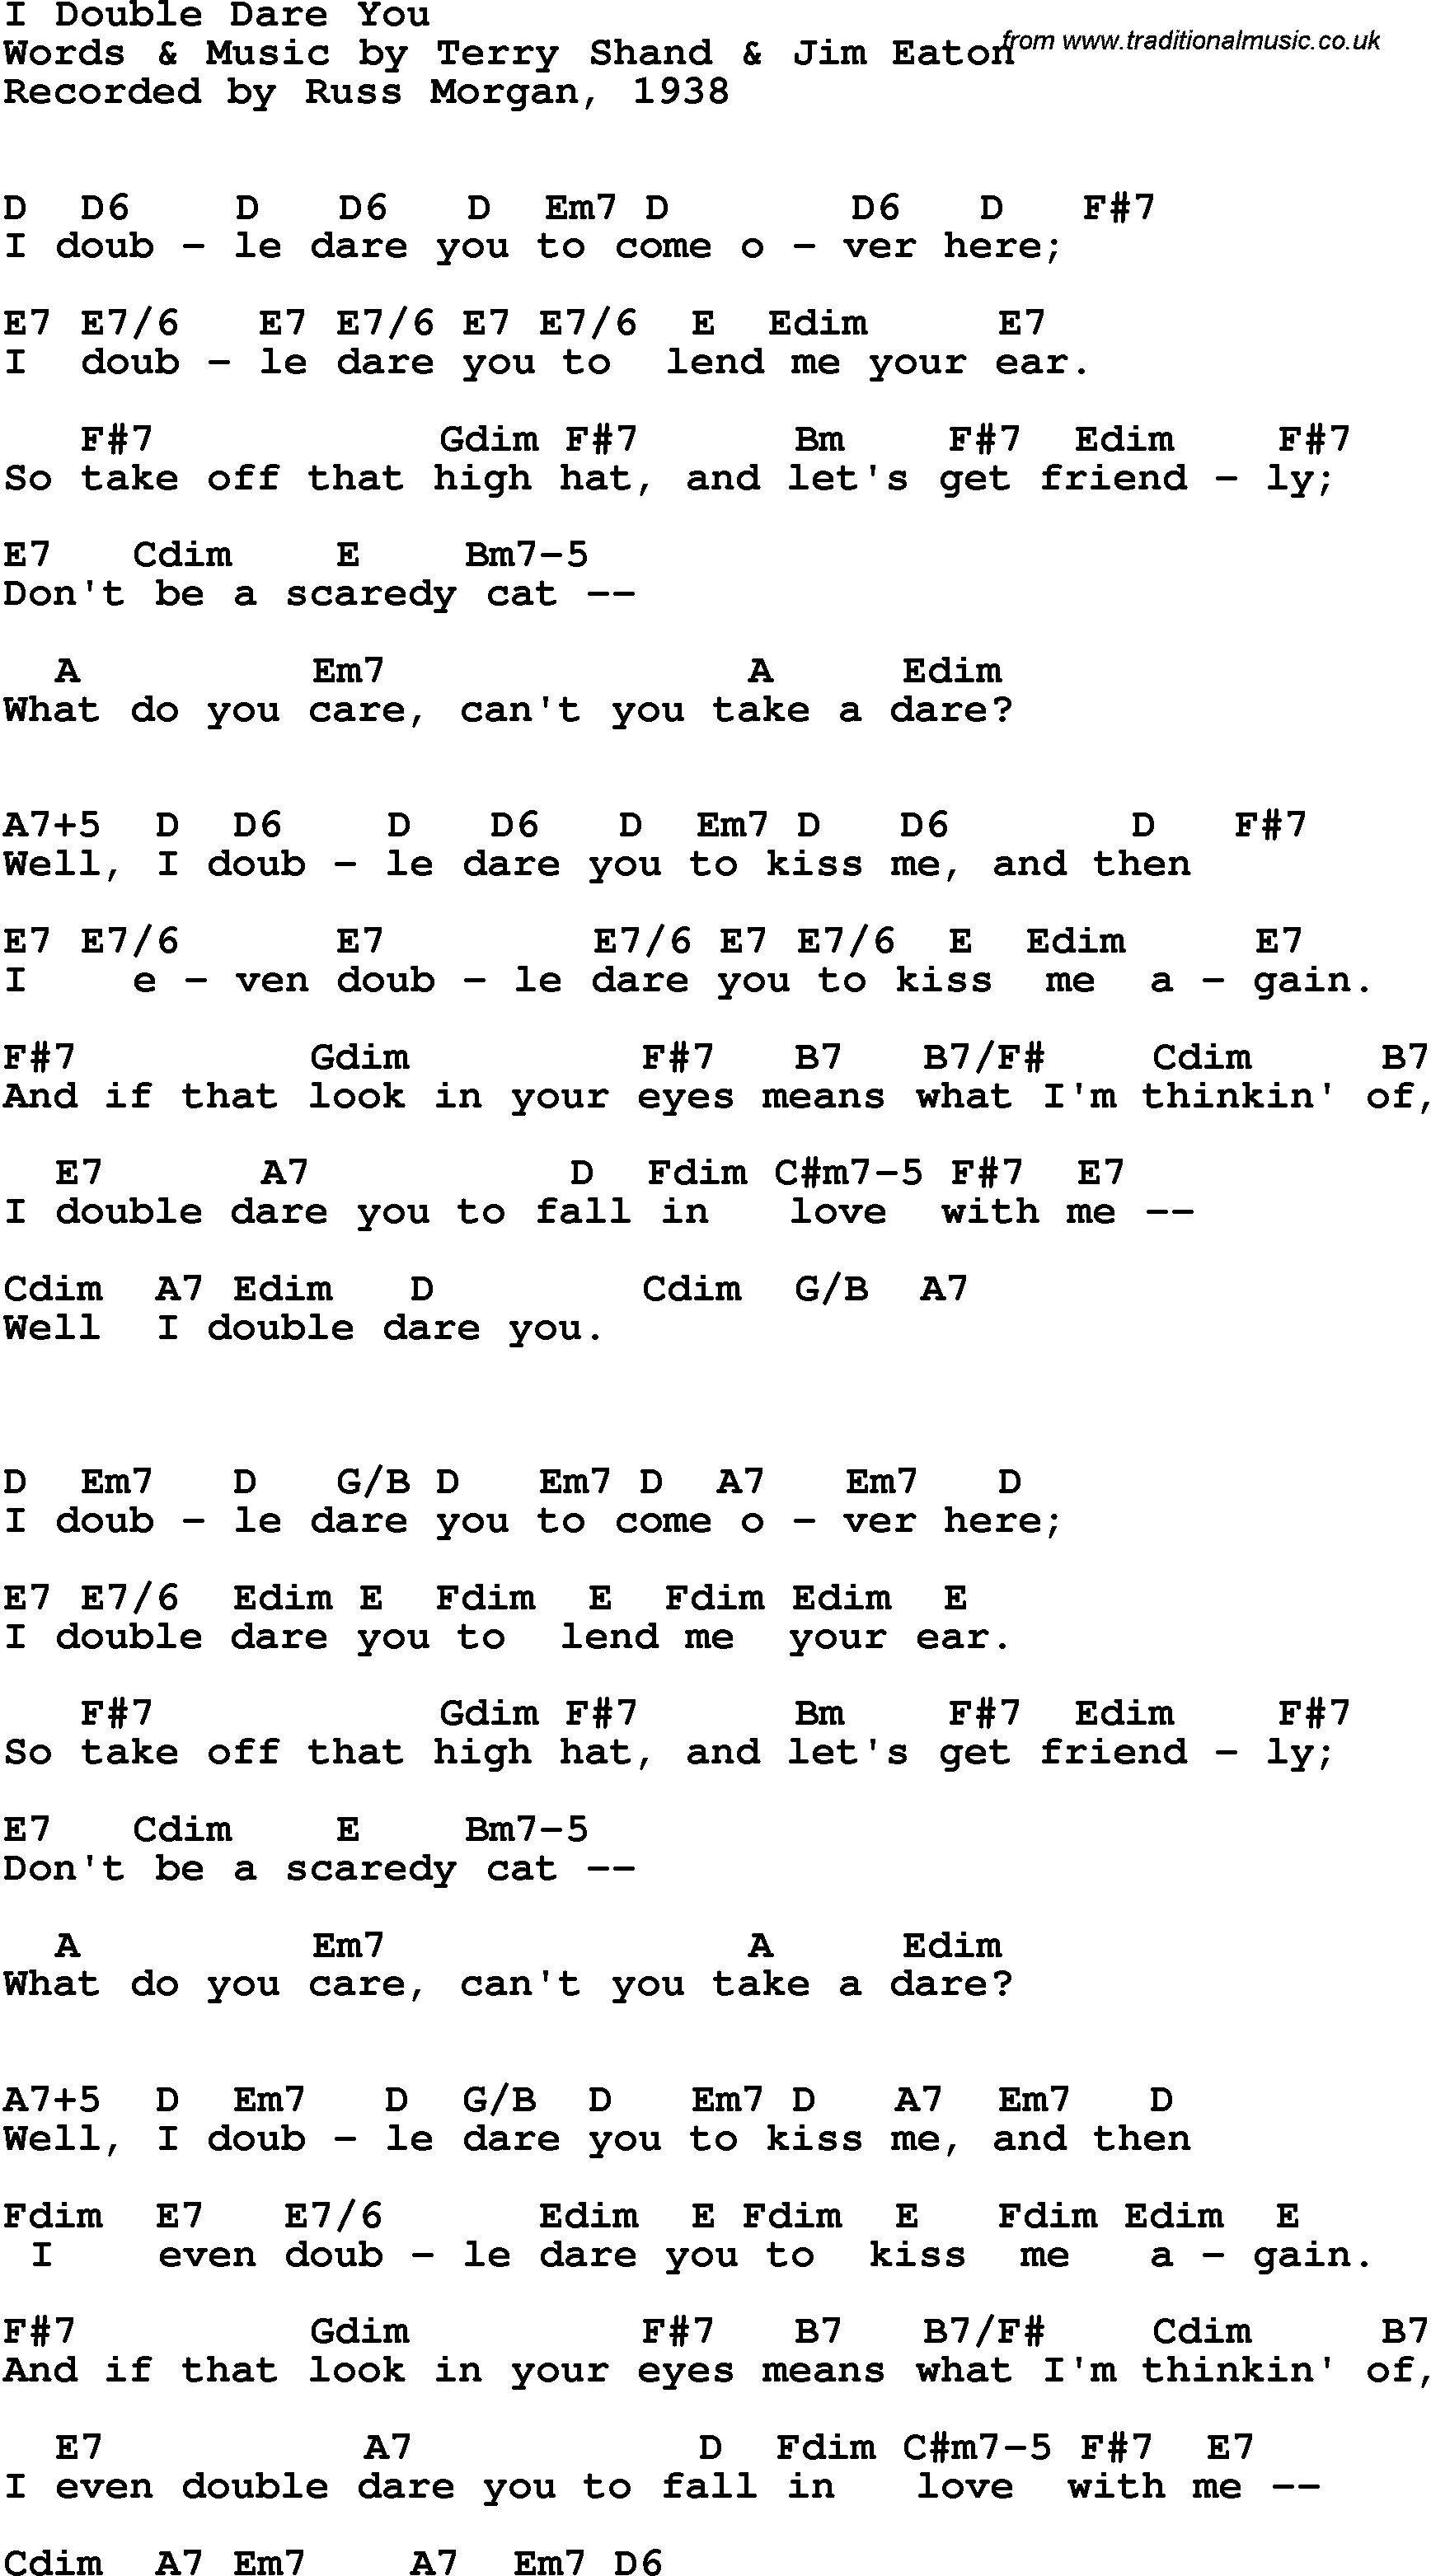 Song Lyrics with guitar chords for I Double Dare You - Russ Morgan, 1938